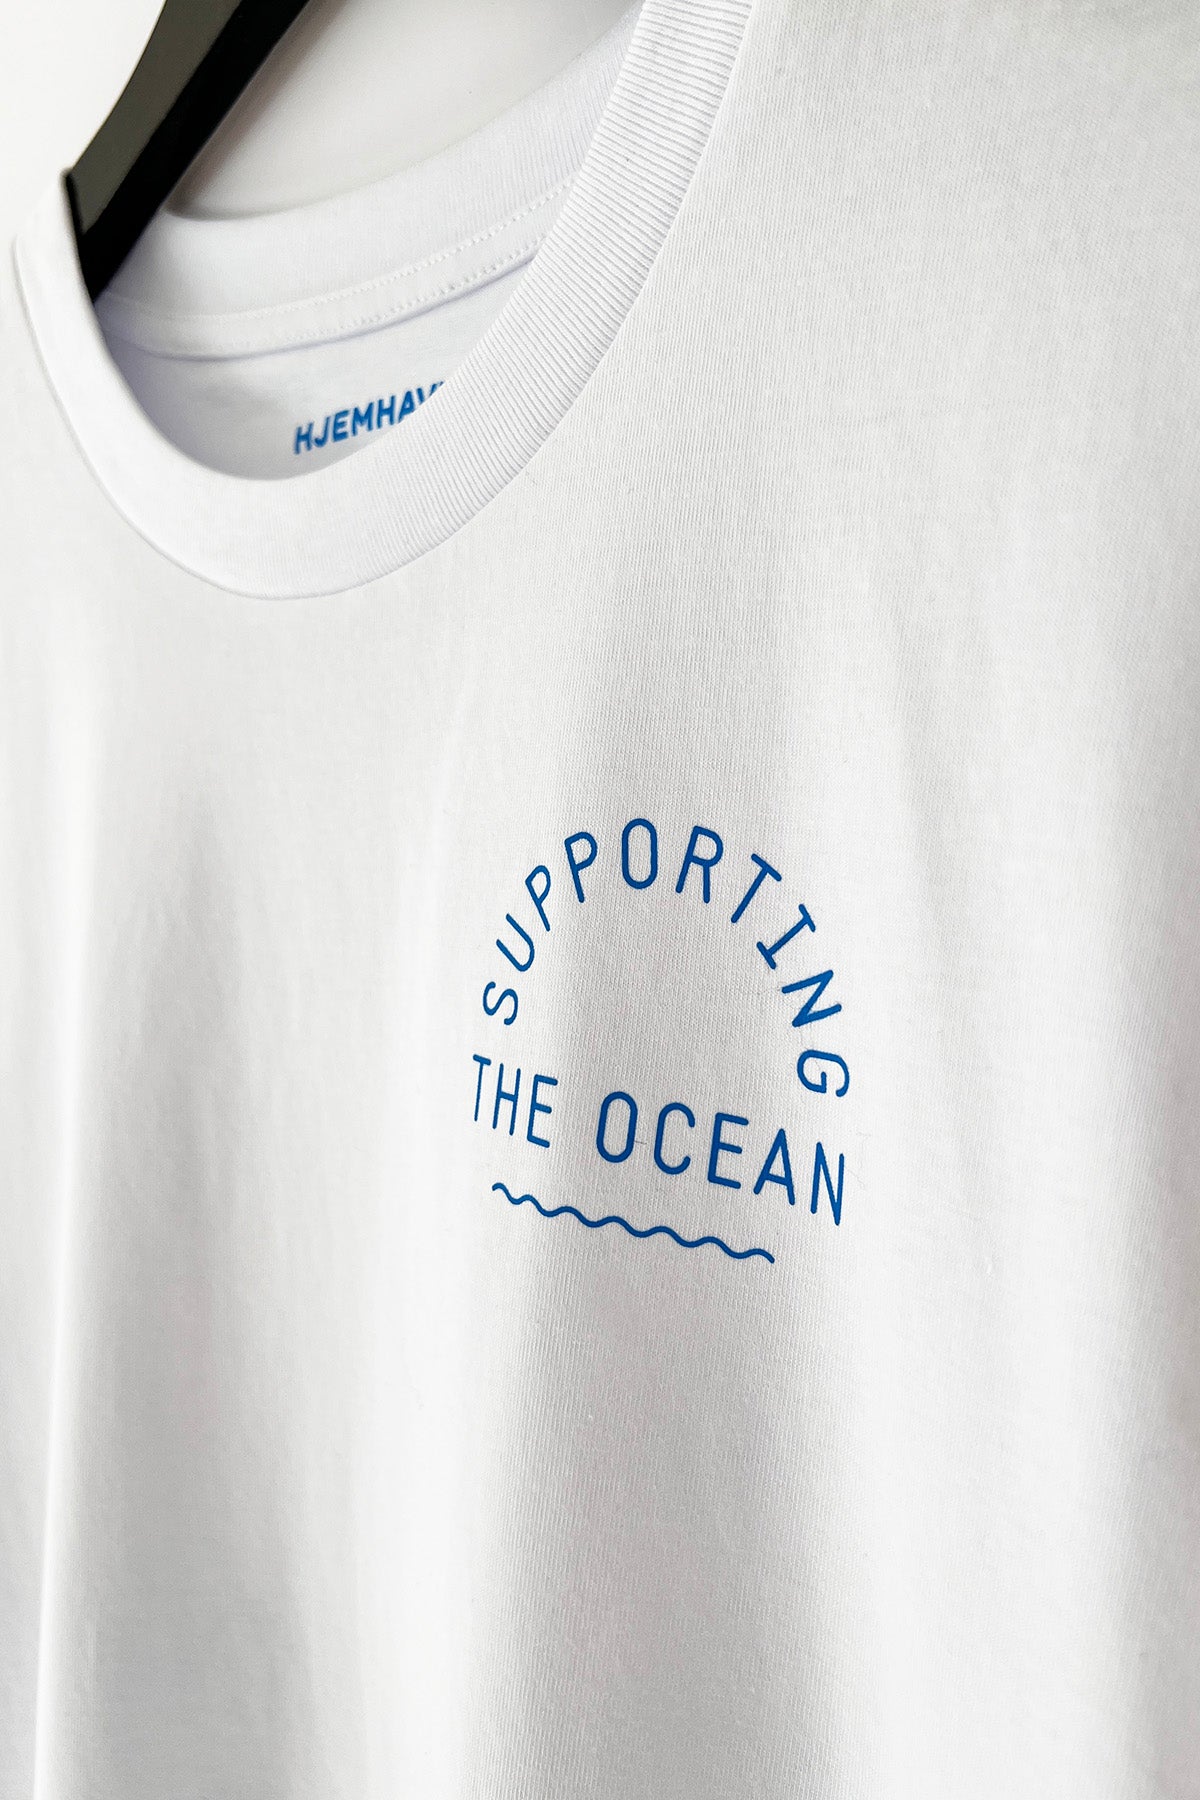 Tee "Supporting the Ocean"